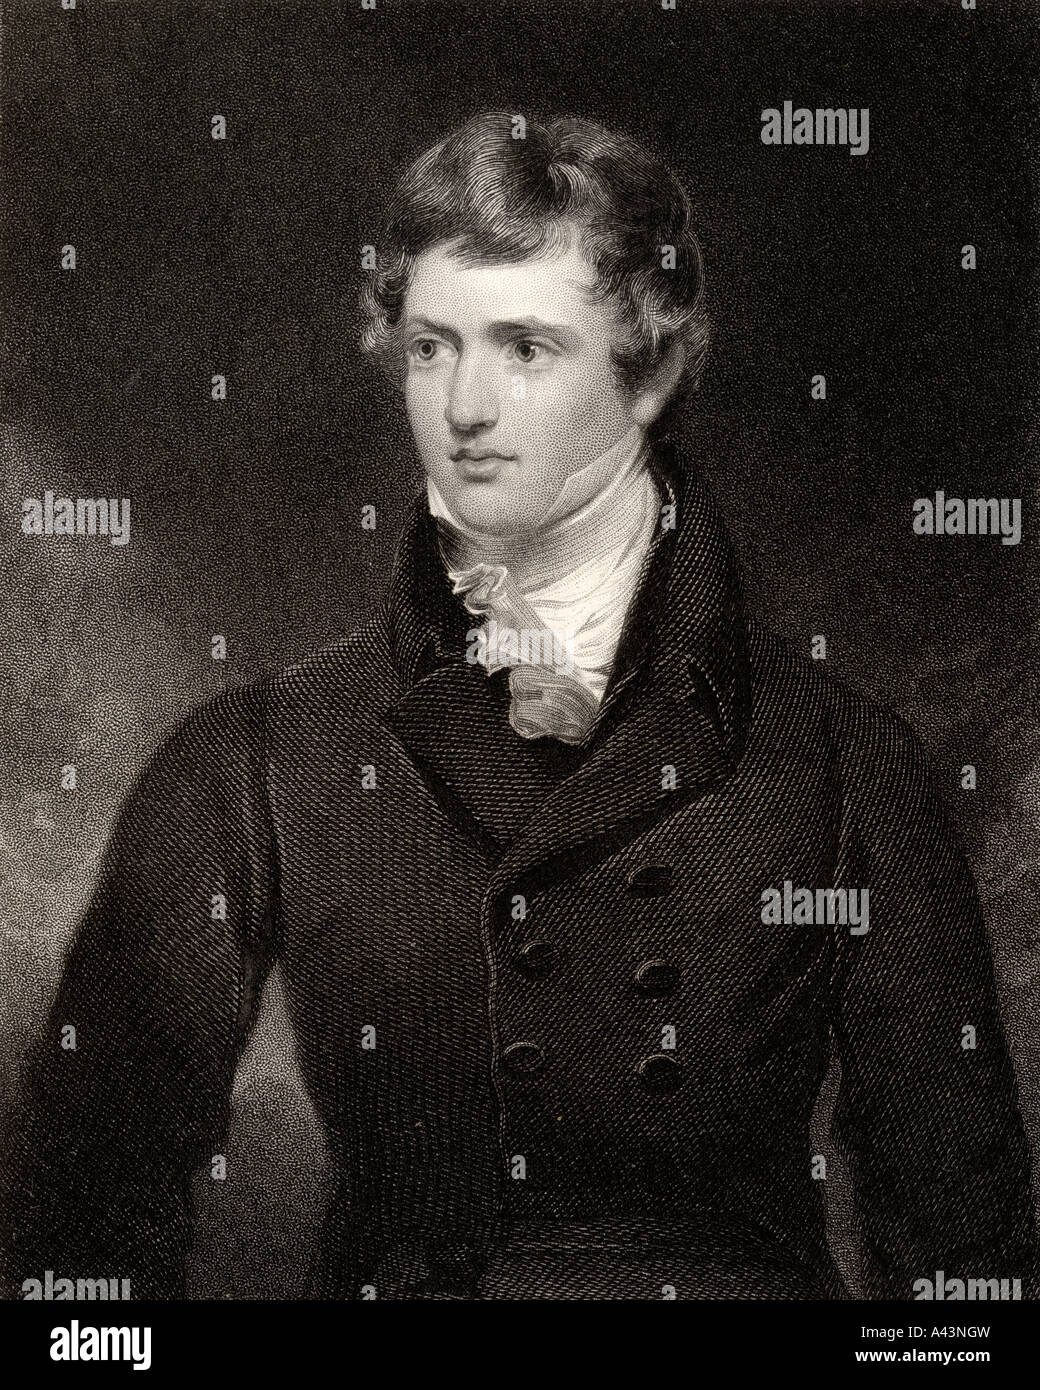 Edward George Geoffrey Smith-Stanley, 14th Earl of Derby Lord Stanley, 1799 - 1869. English statesman and three times Prime Minister of United Kingdom. Stock Photo